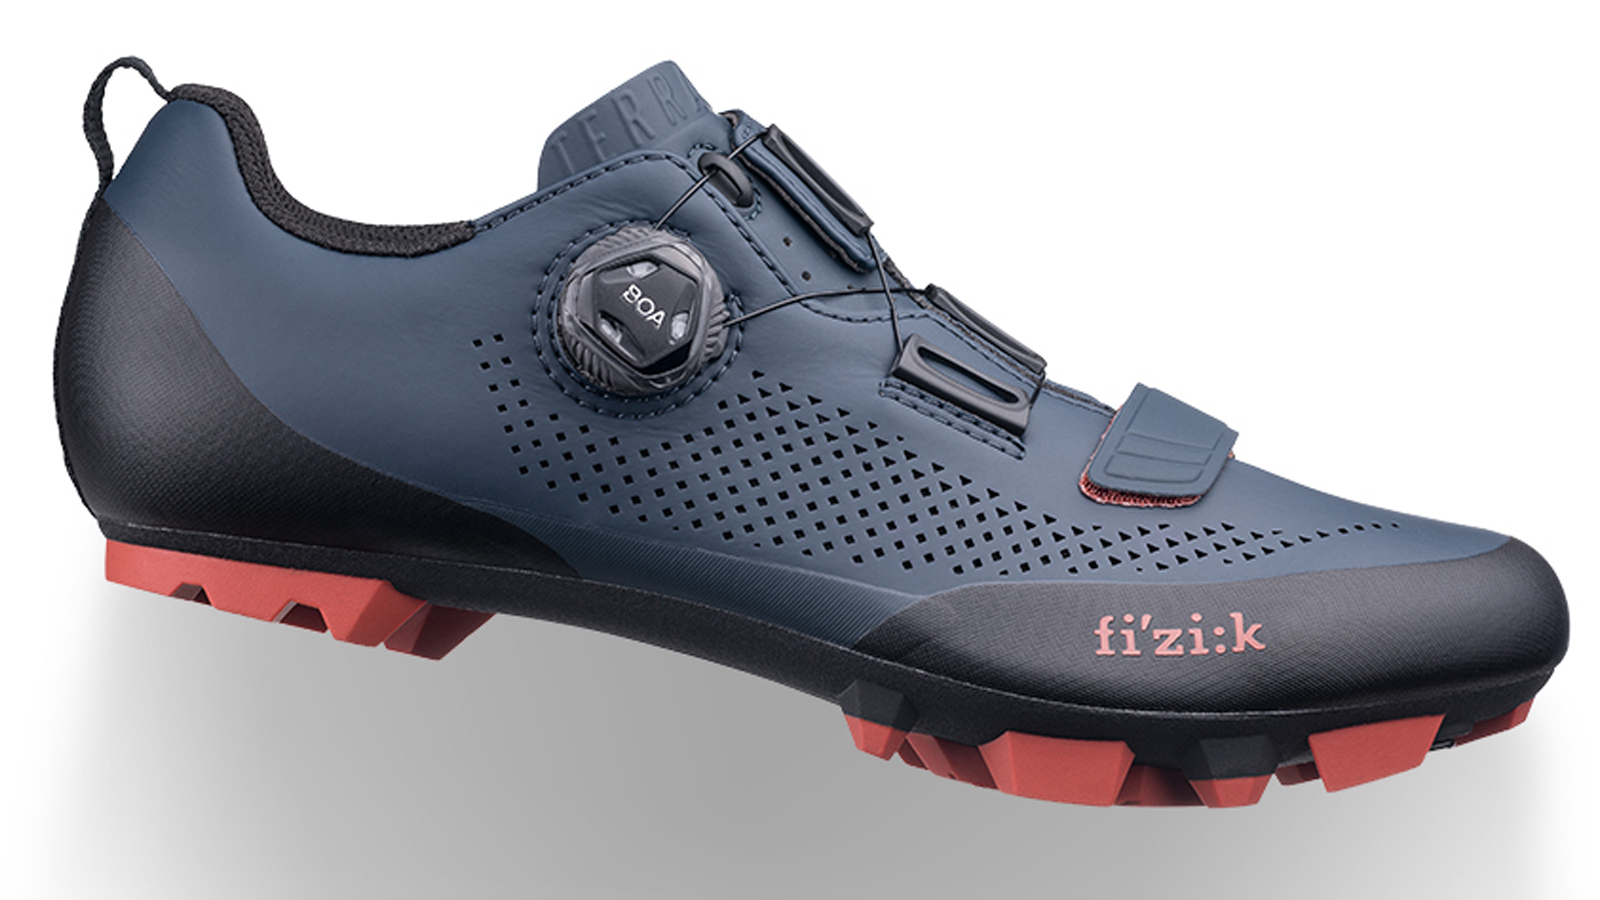 Best gravel bike shoes Gravel bike shoe options for racers and